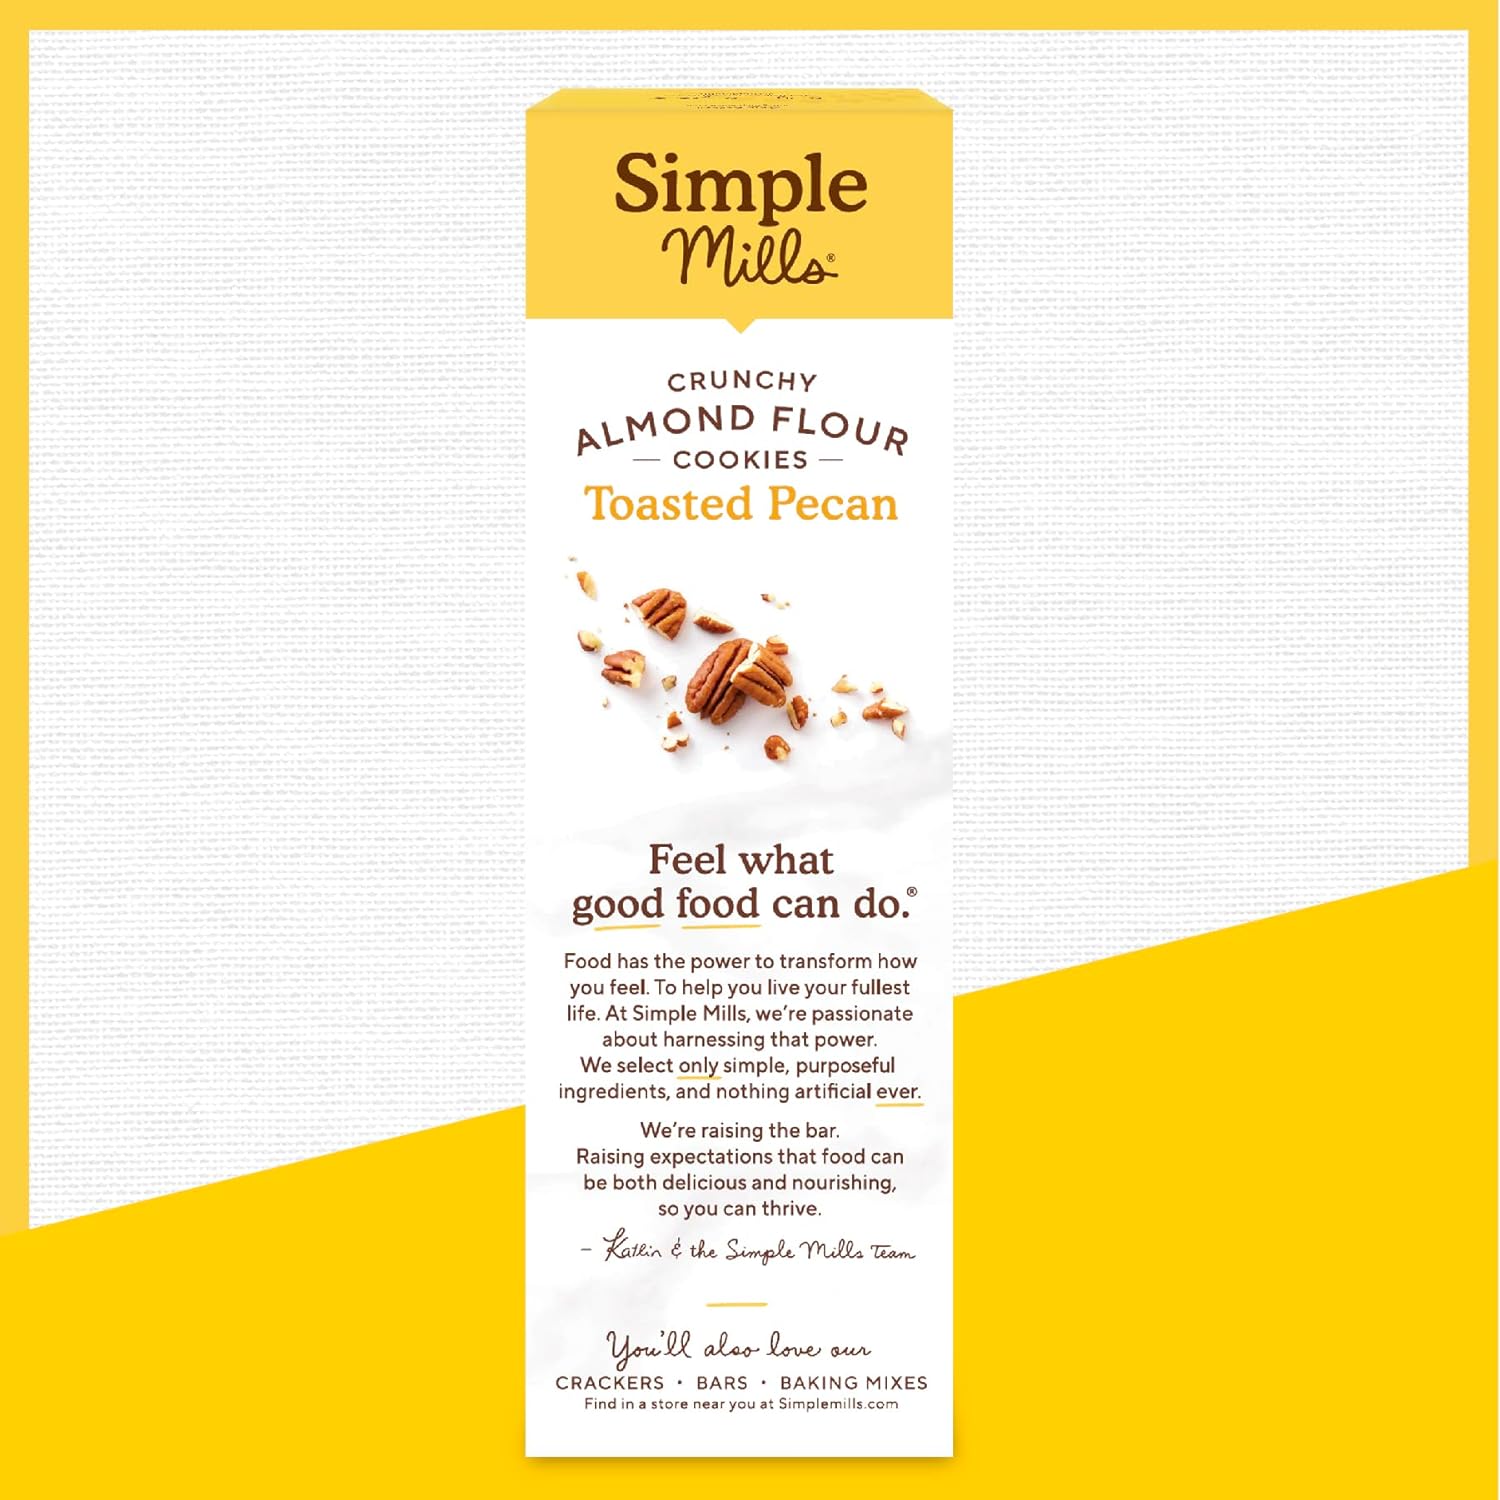 Simple Mills Almond Flour Crunchy Cookies, Toasted Pecan - Gluten Free, Vegan, Healthy Snacks, Made with Organic Coconut Oil, 5.5 Ounce (Pack of 3) : Grocery & Gourmet Food